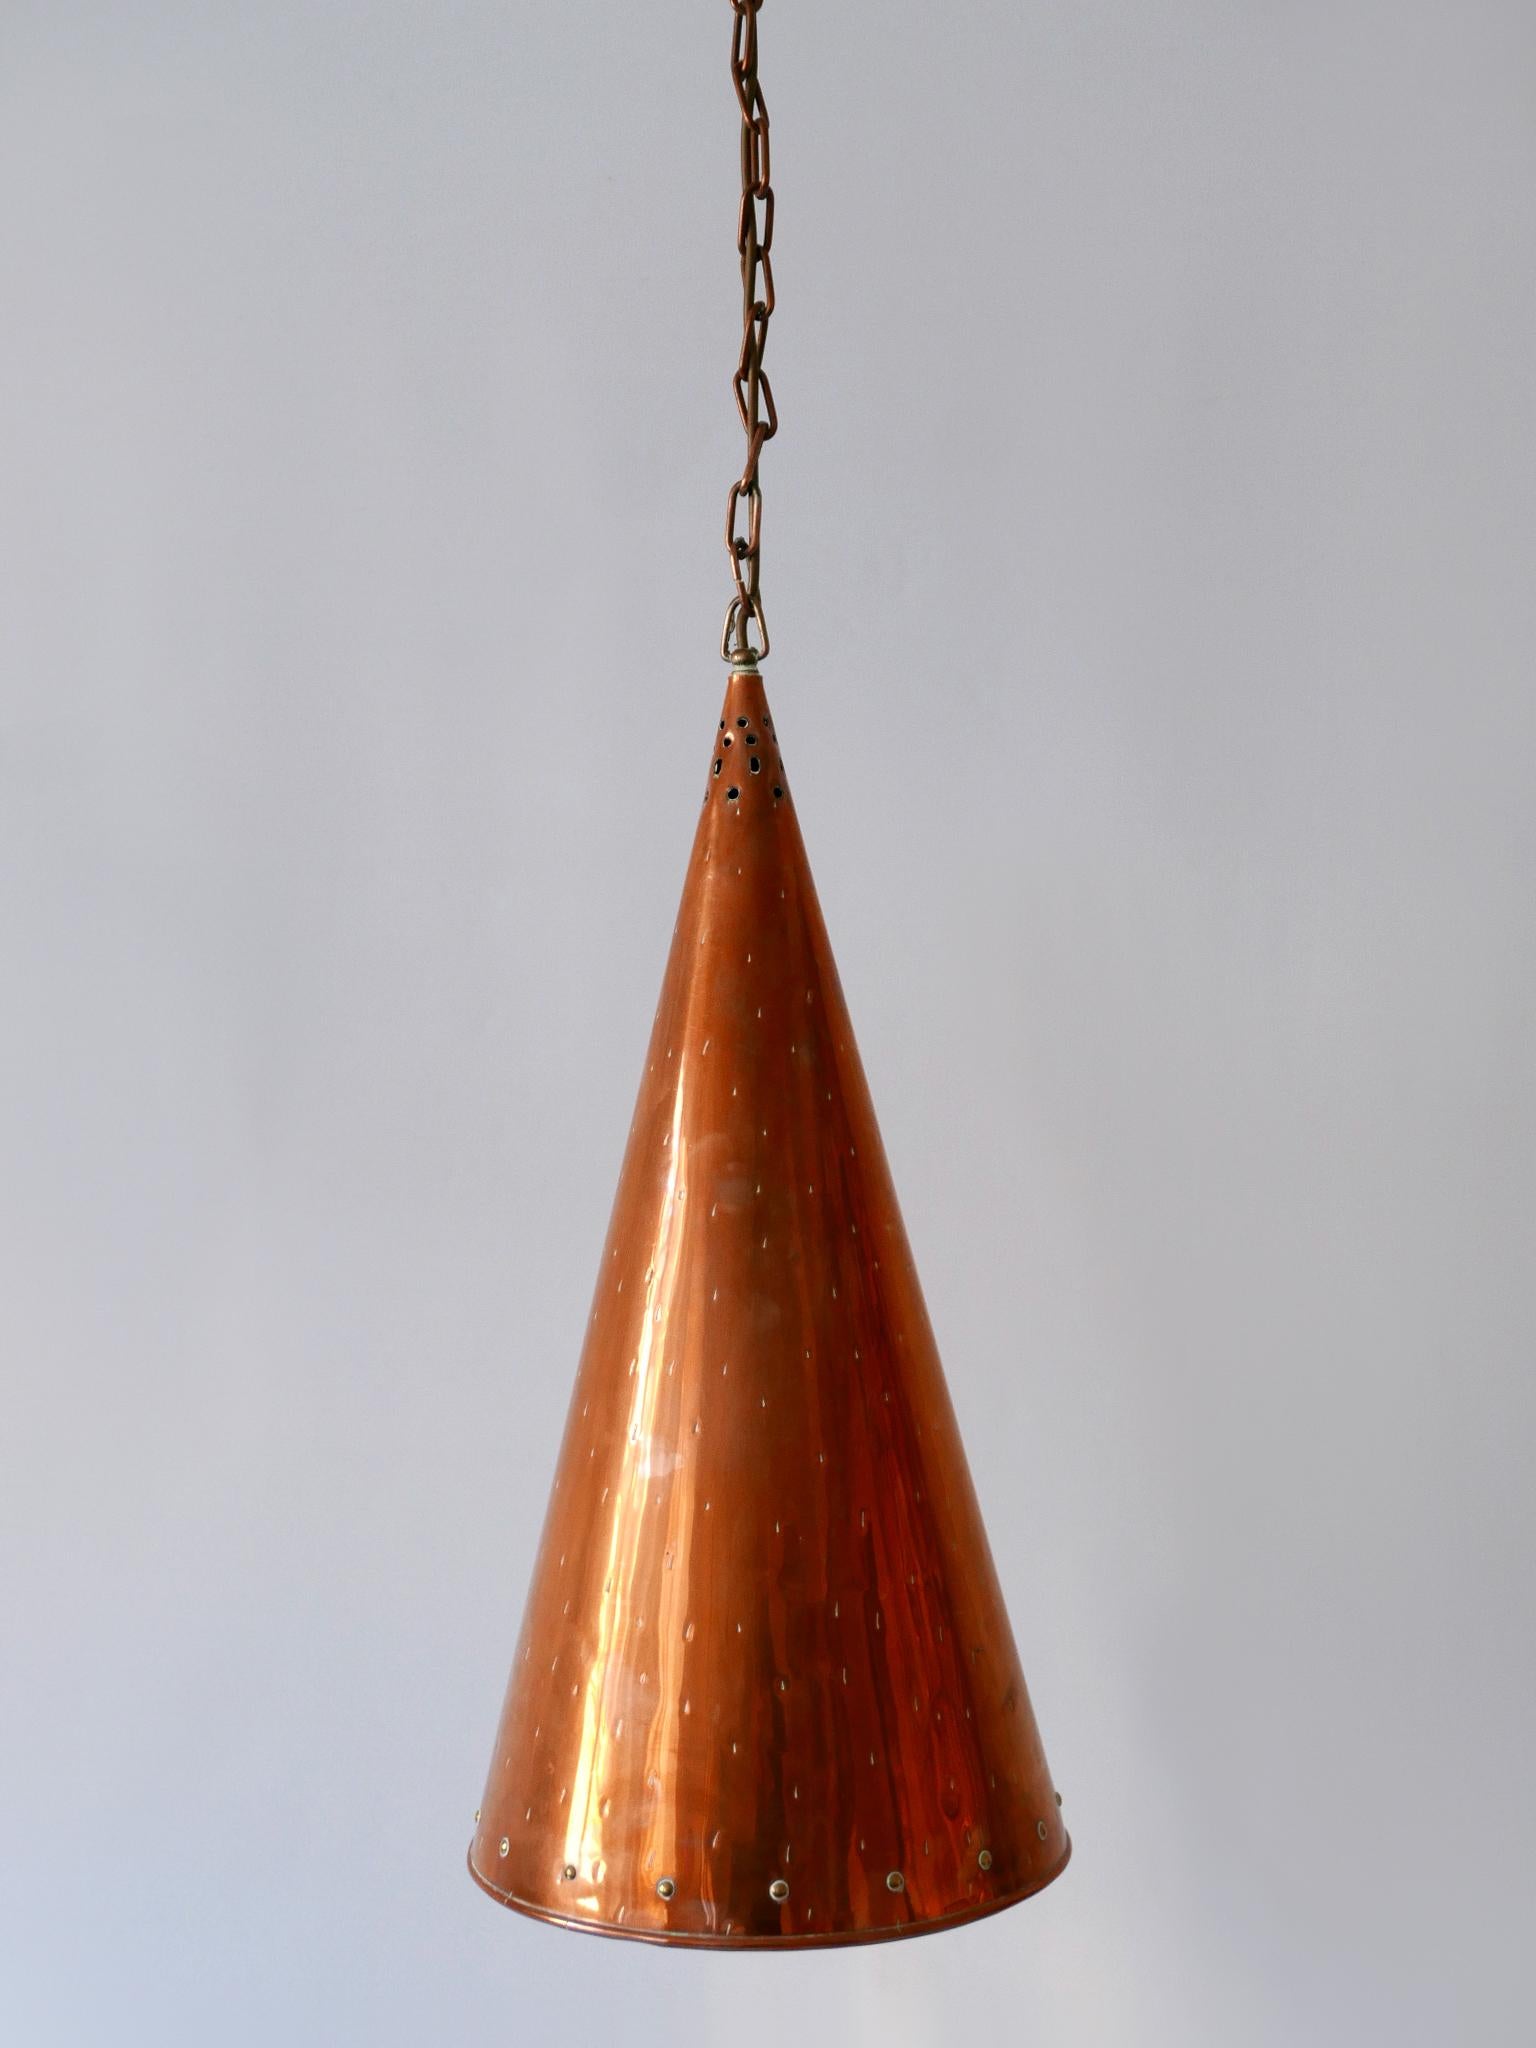 XL Mid Century Modern Copper Pendant Lamp by E.S. Horn Aalestrup Denmark 1950s For Sale 3